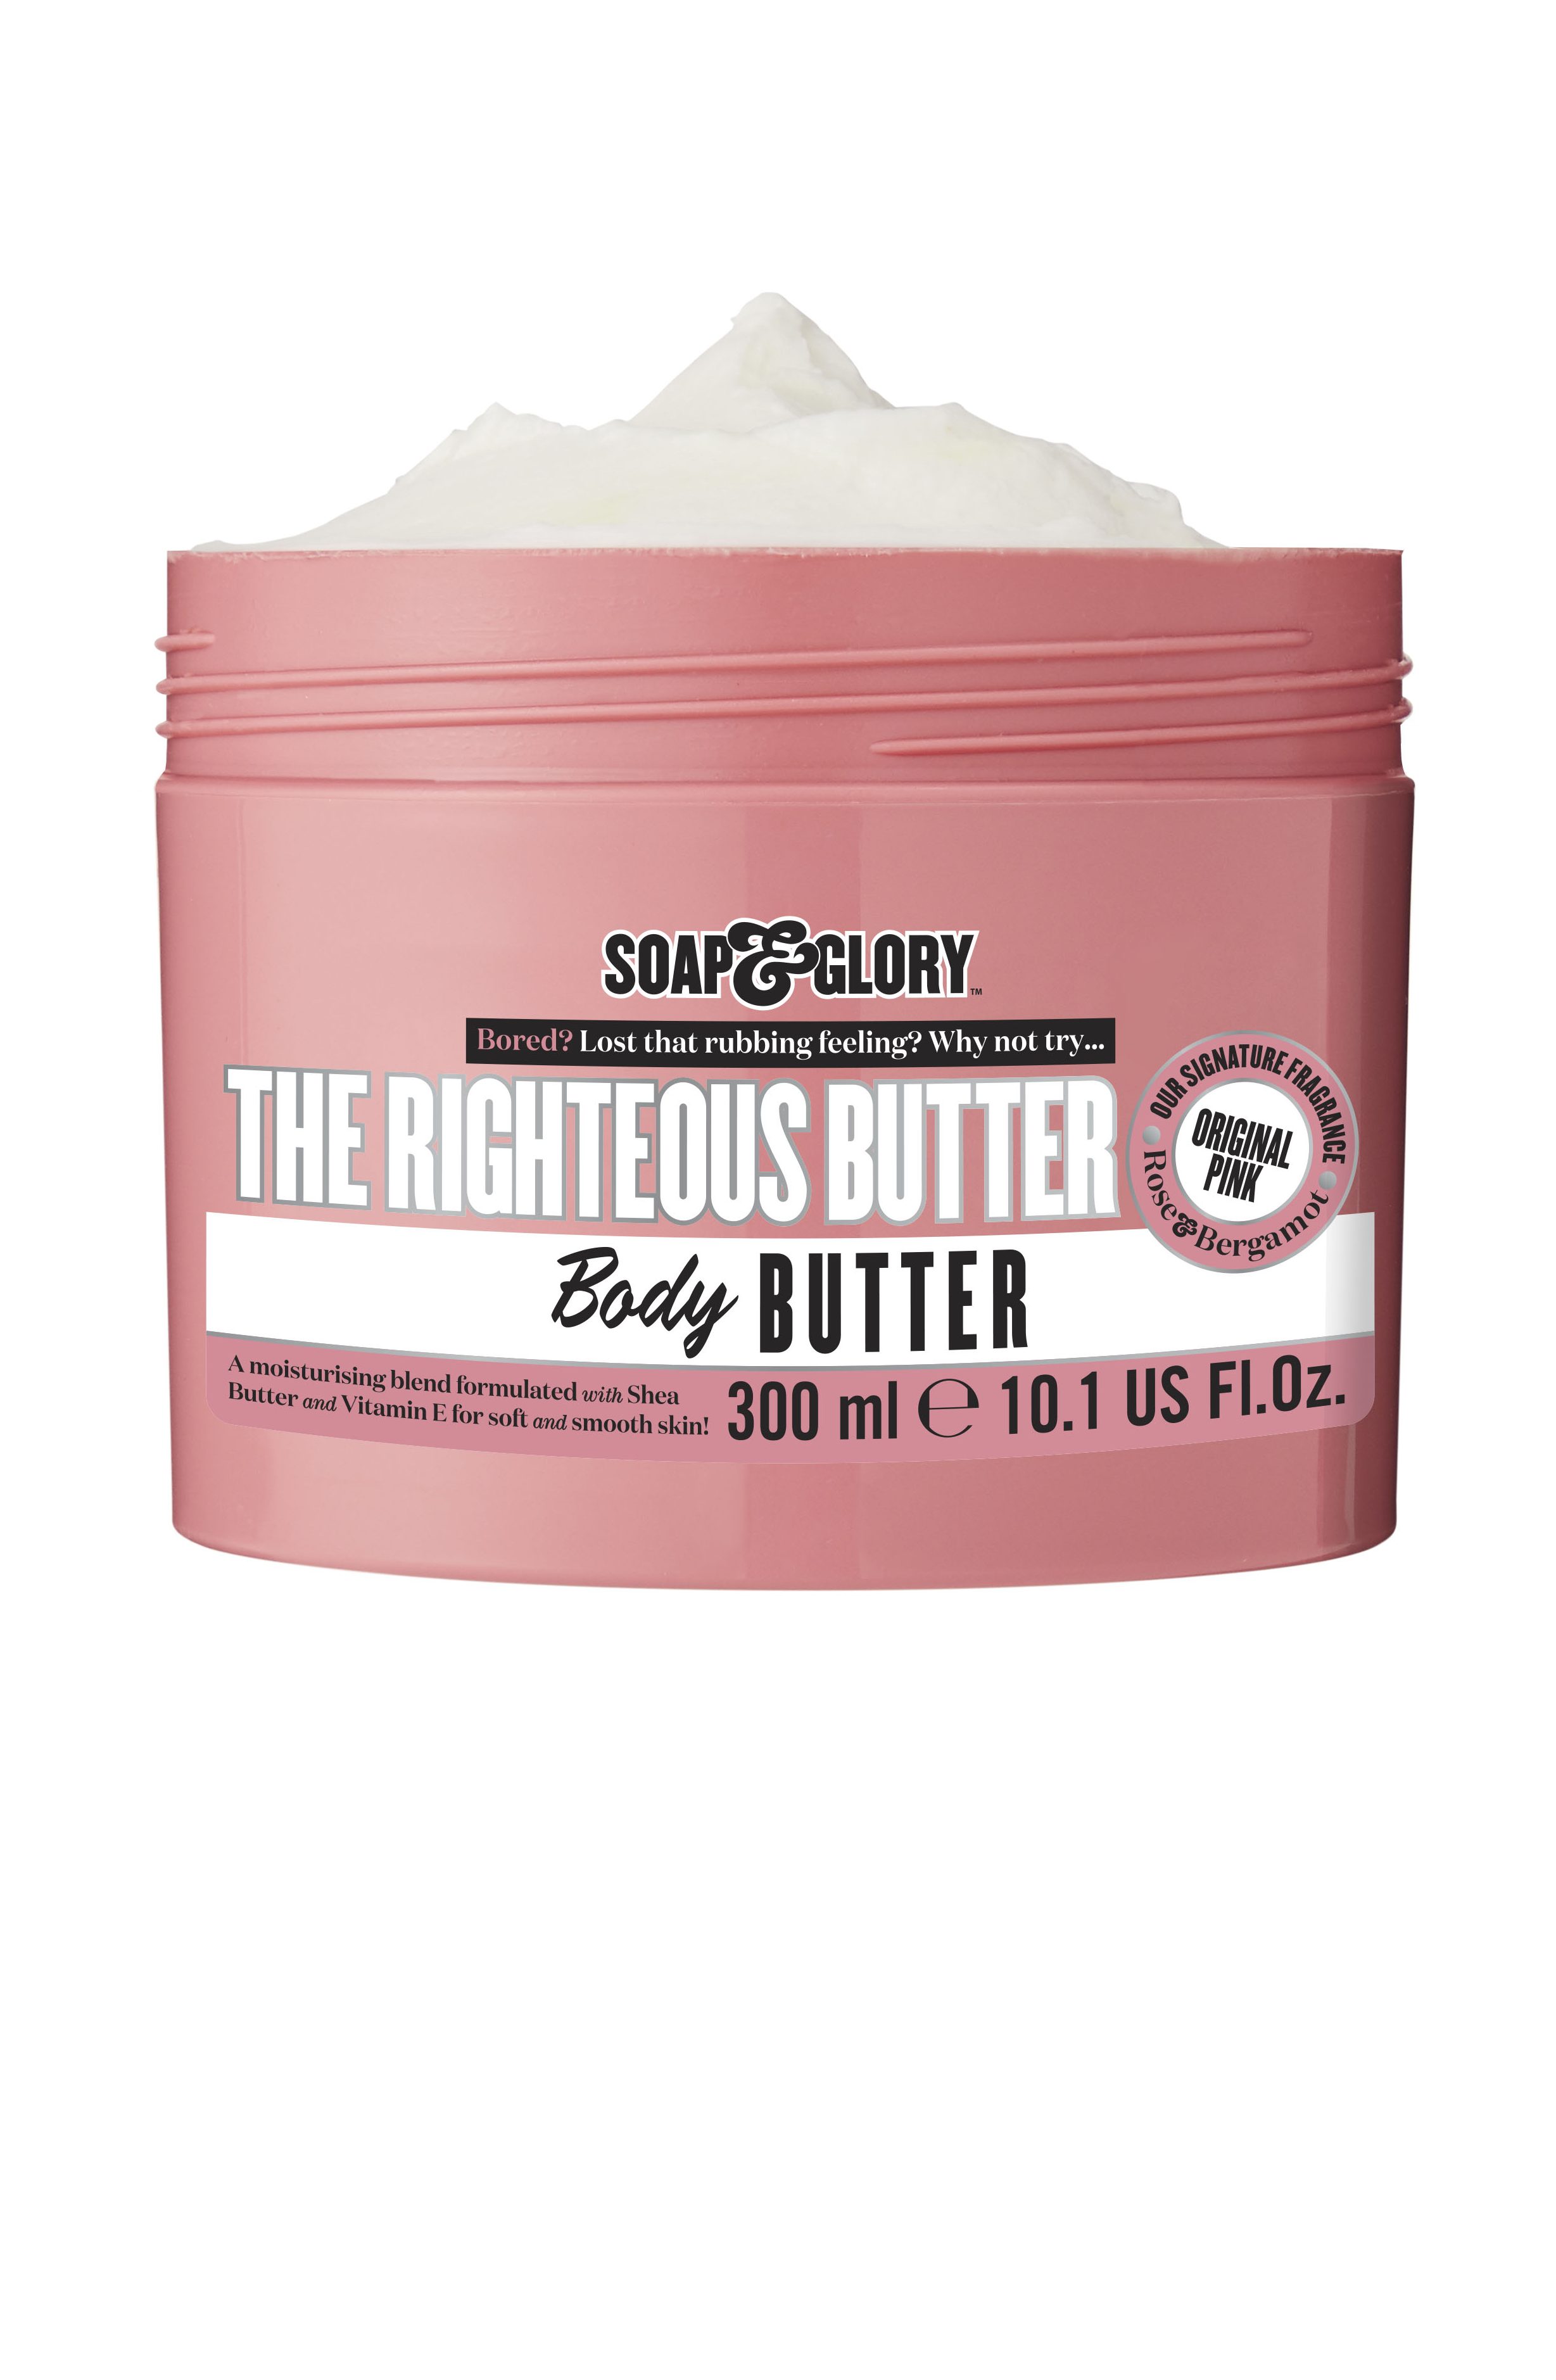 Tub of Soap & Glory body butter.